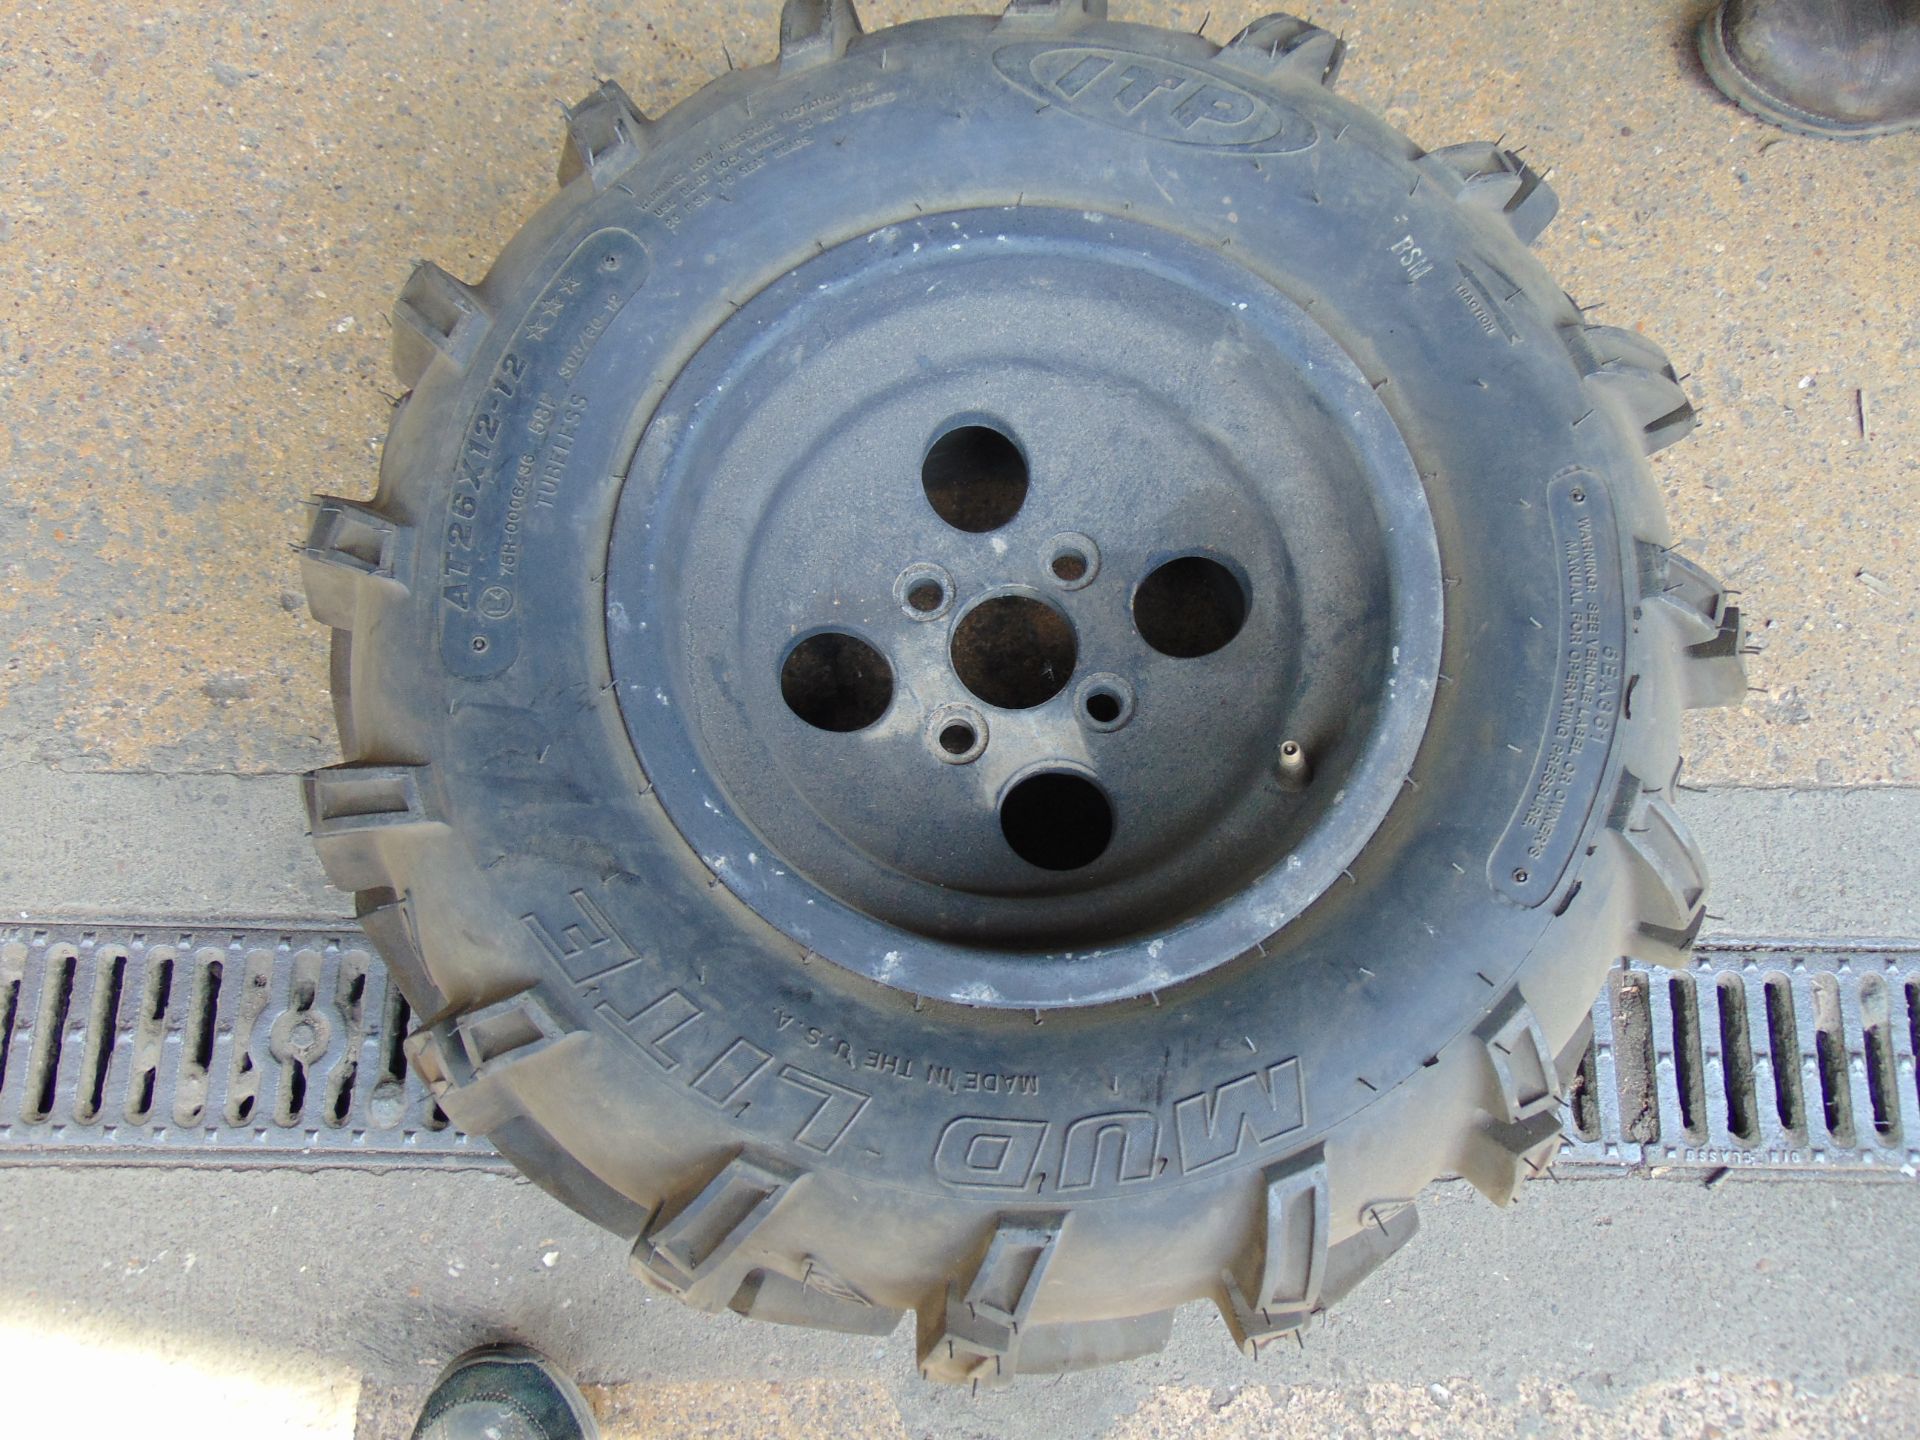 New Unissued RTV Spare Wheel and Tyre, Mud Lite AT 26x12-12 - Image 2 of 5